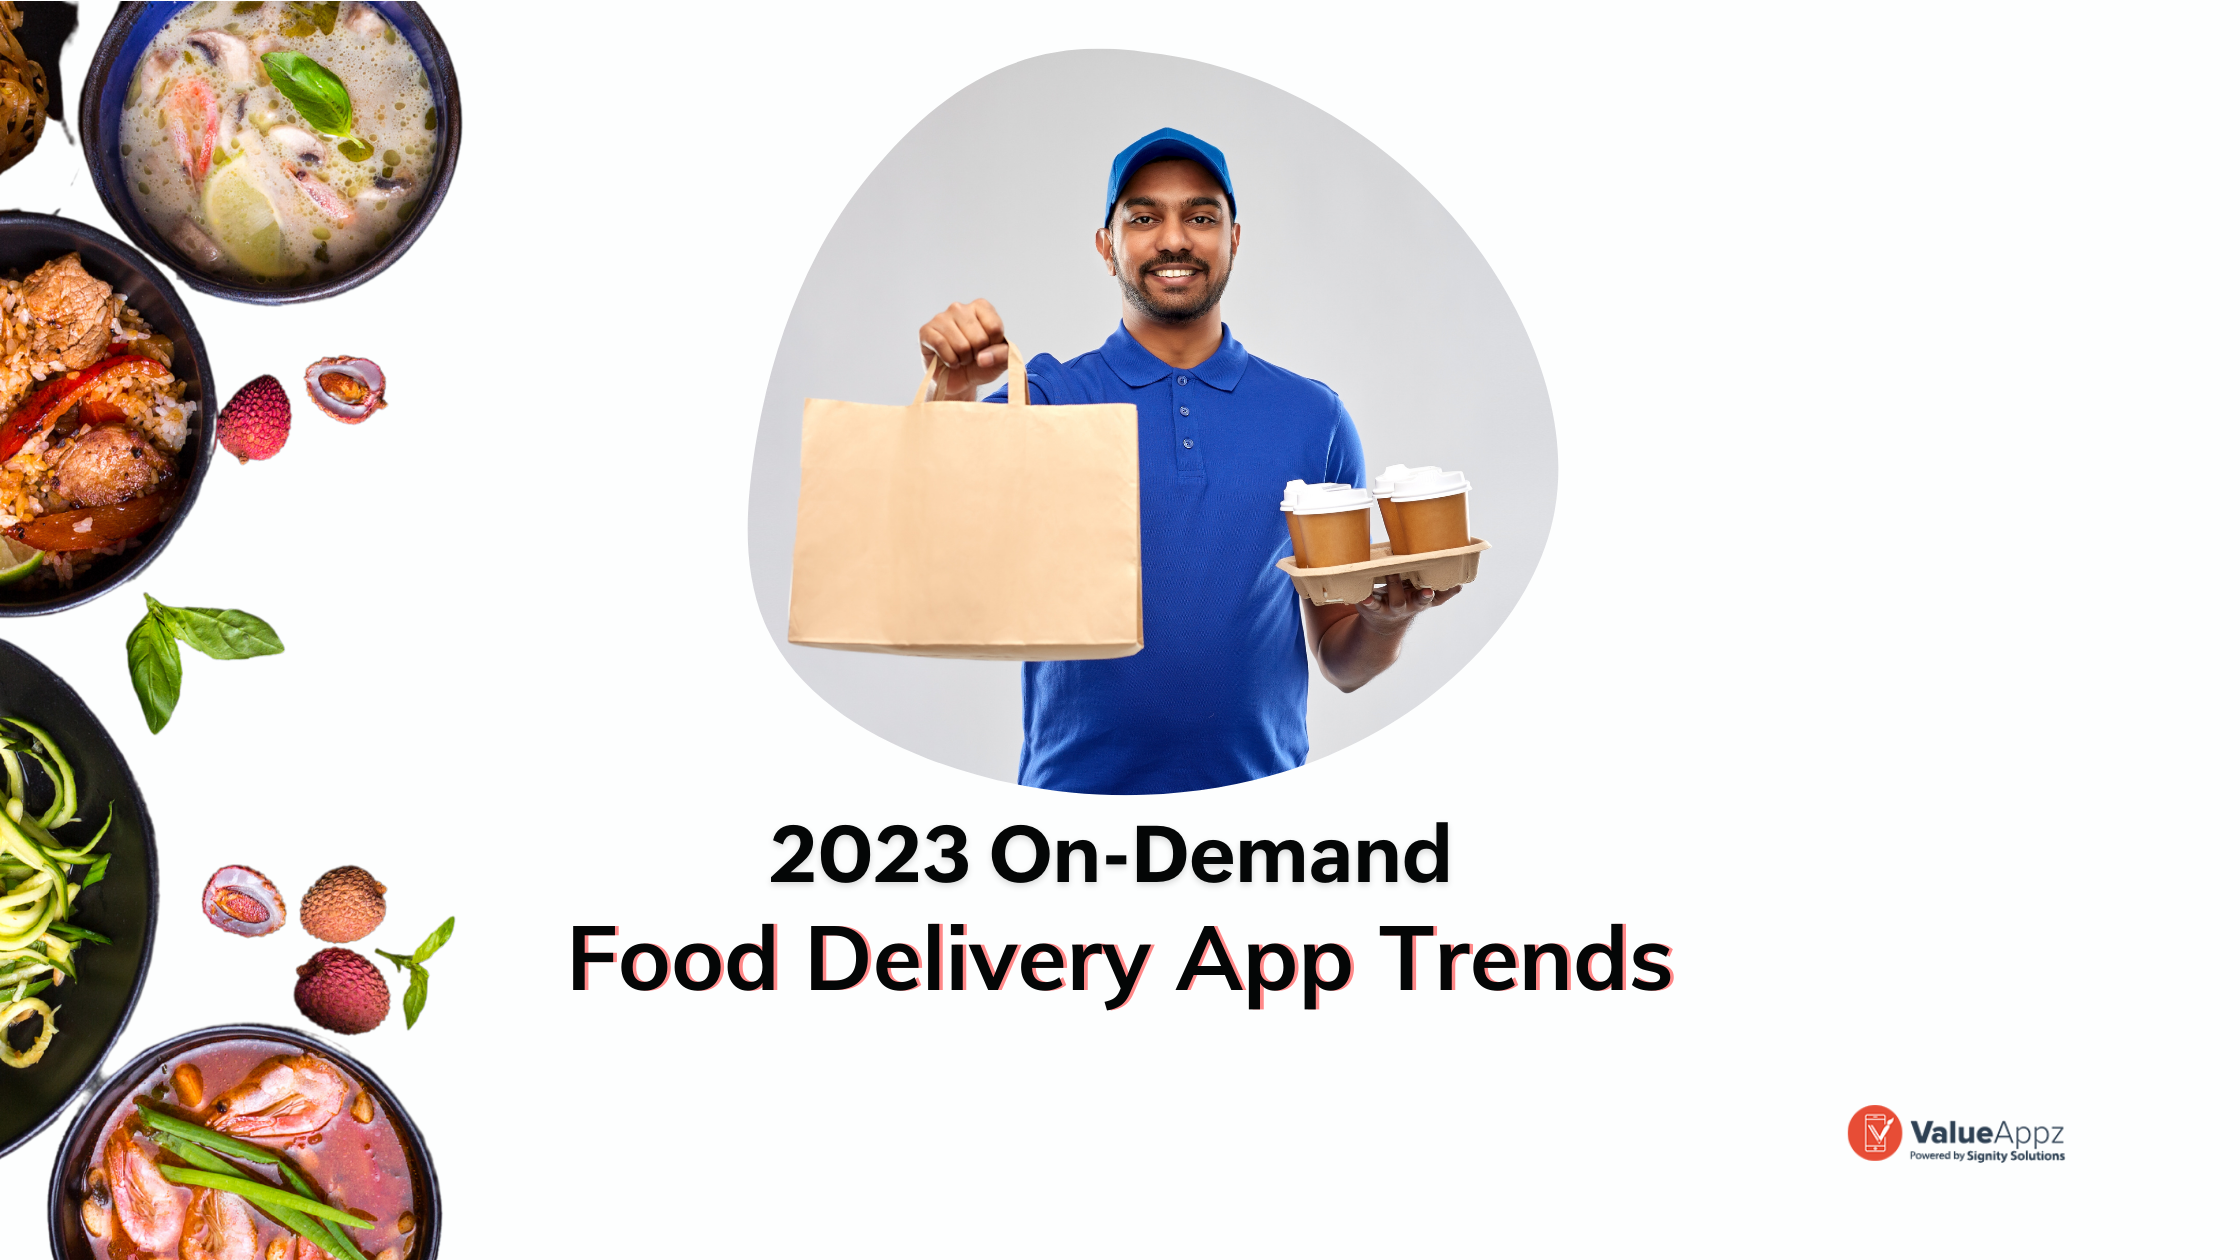 Market Insights For On-Demand Food Delivery App